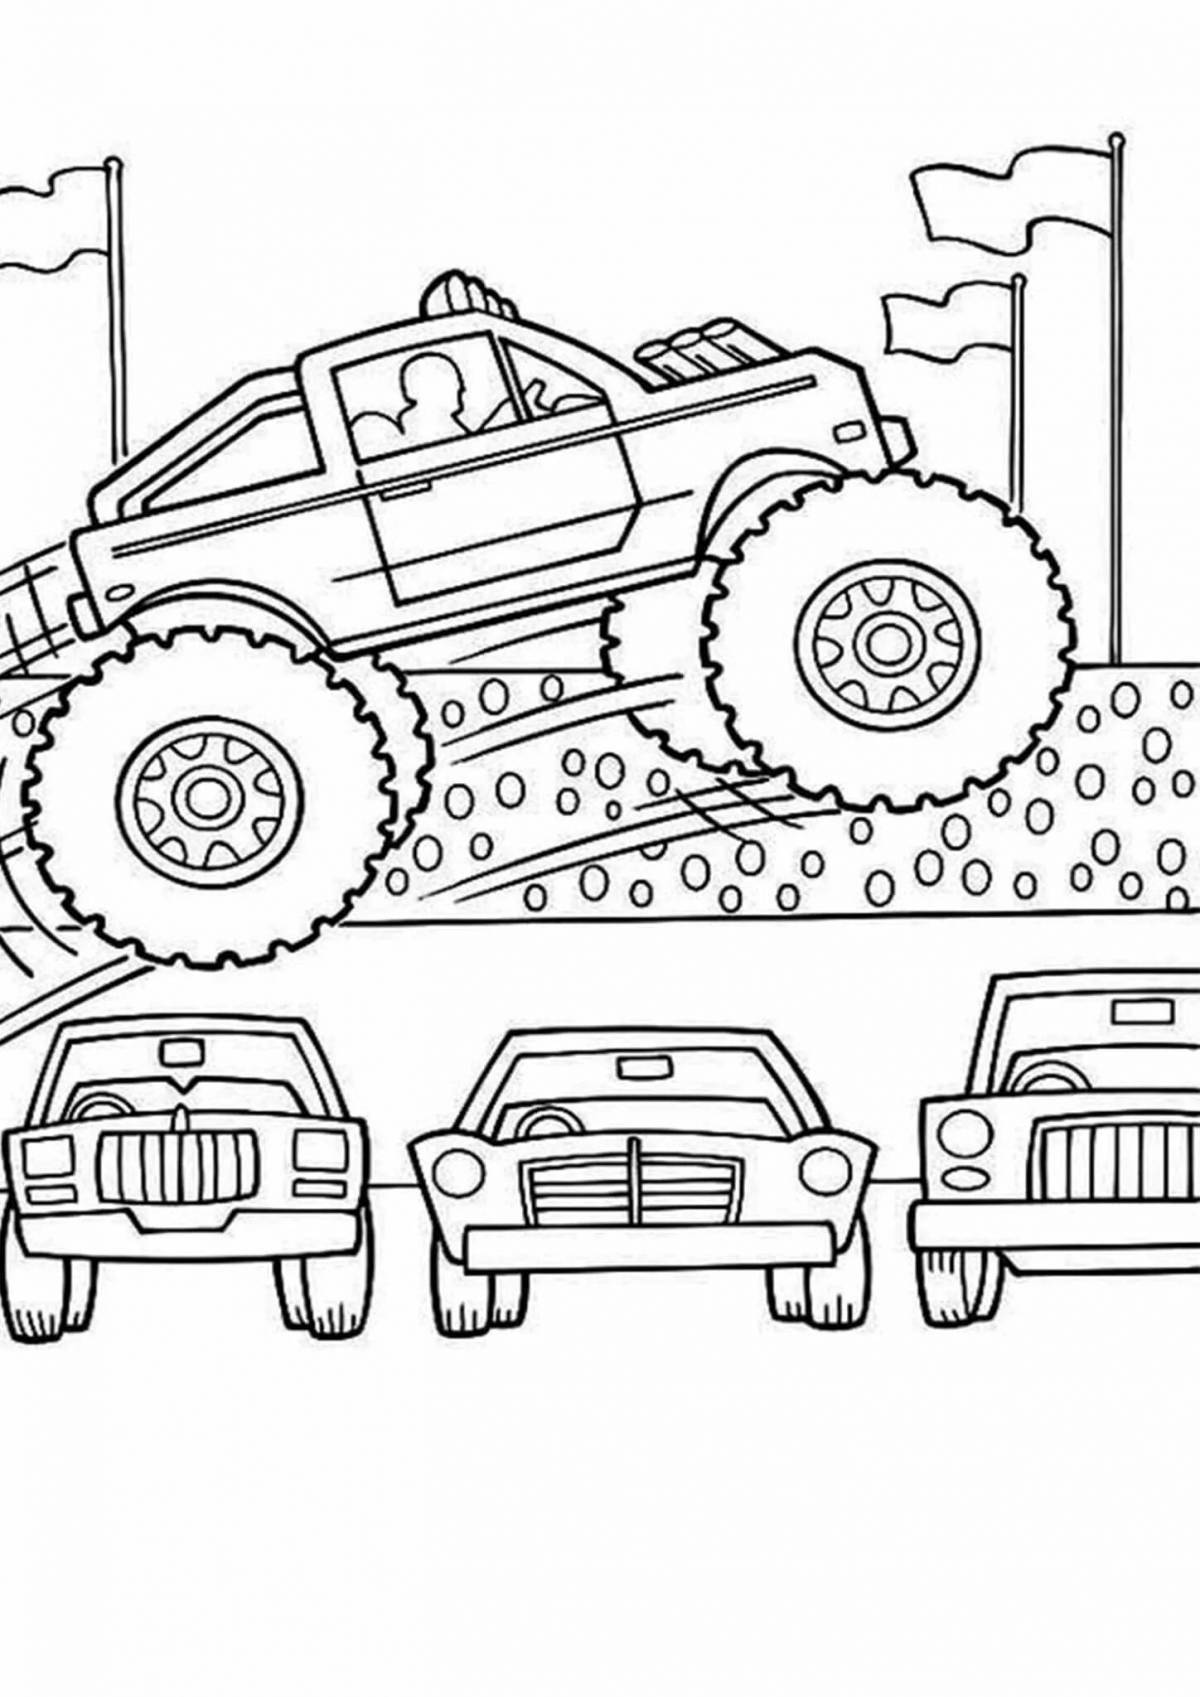 Incredible monster truck jeep coloring book